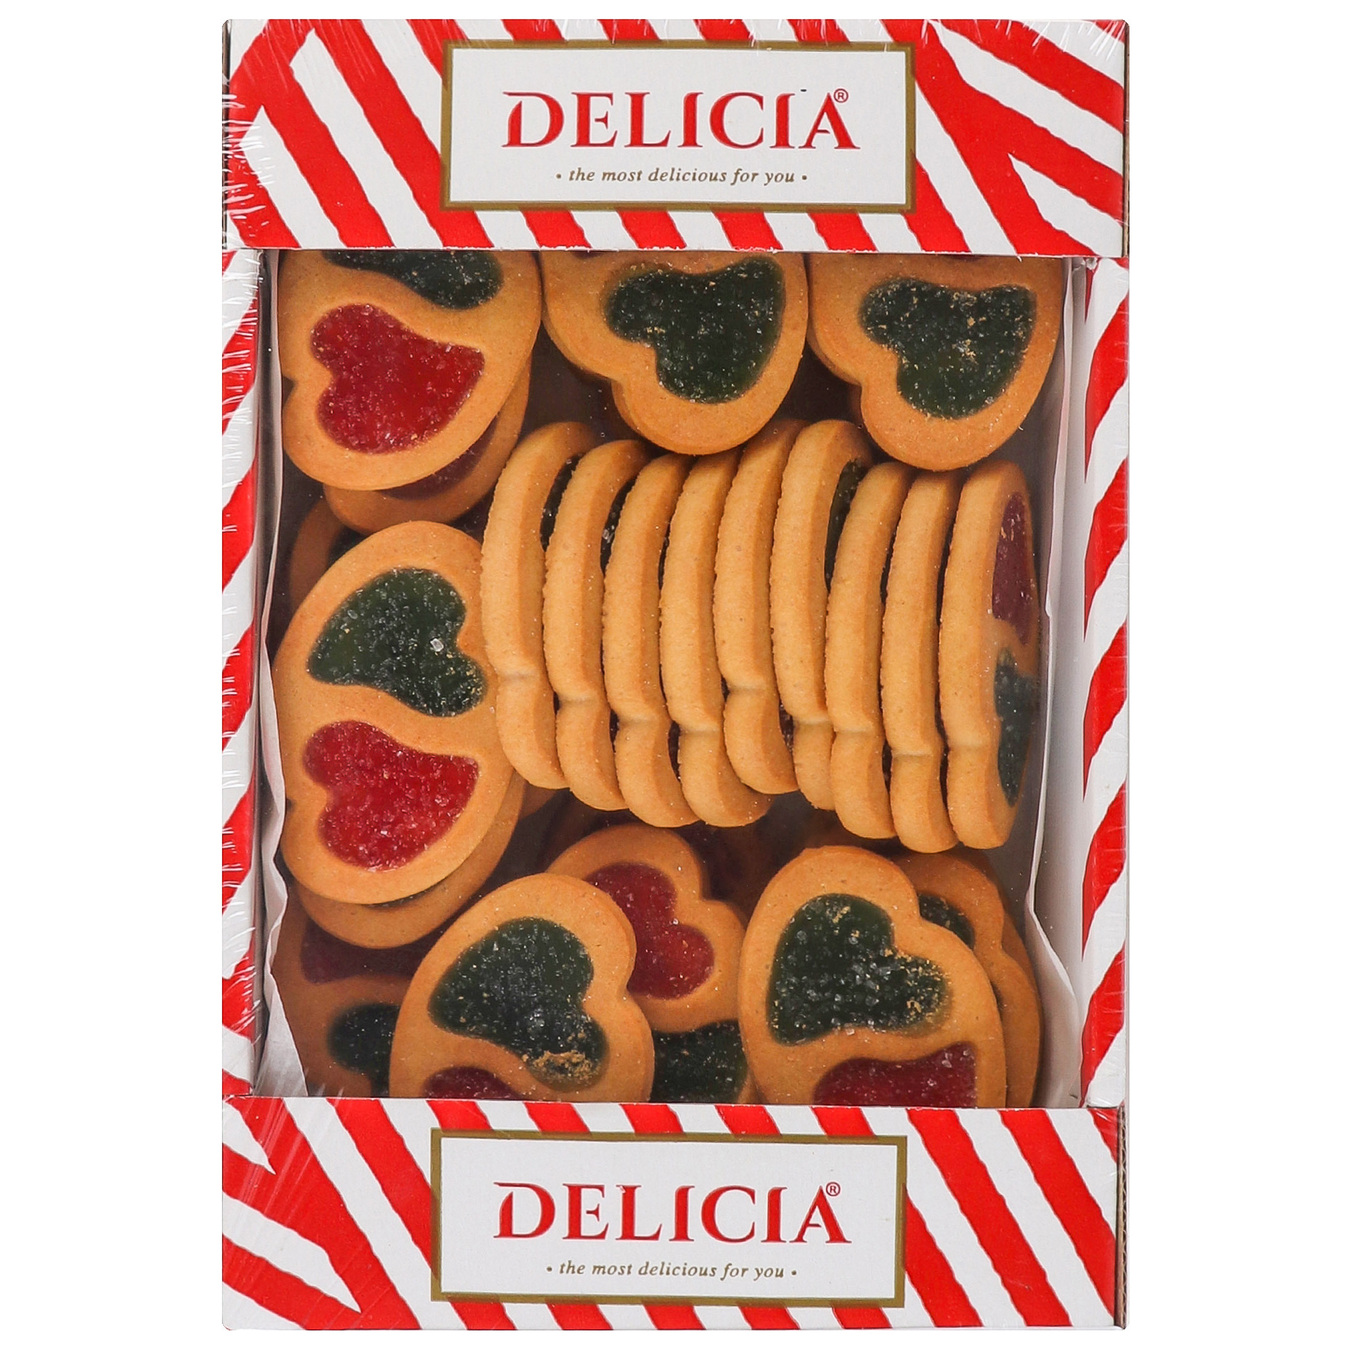 Delicia cookies with strawberry and cactus flavor, 400g